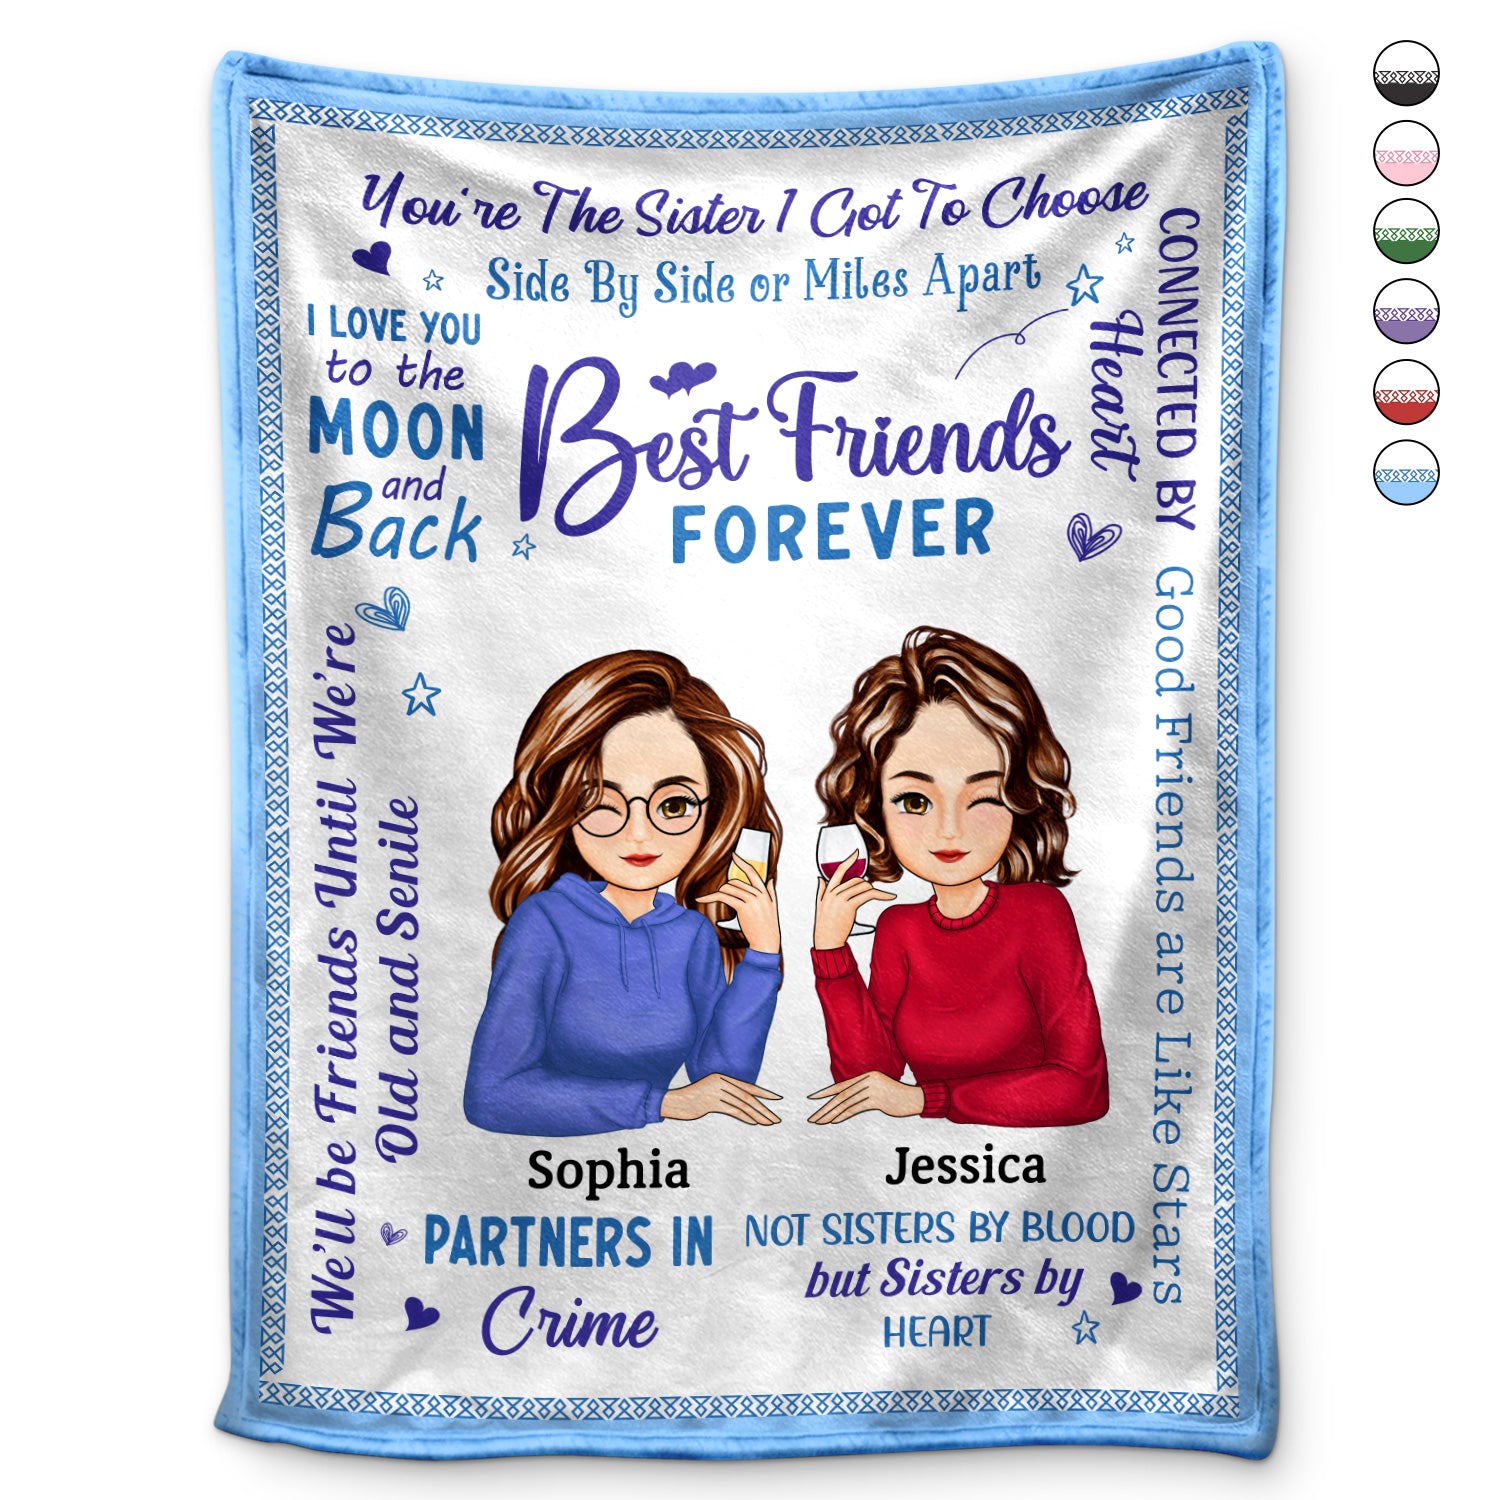 Best Friends Forever Connected By Heart Cartoon - Loving Gifts For Besties - Personalized Fleece Blanket